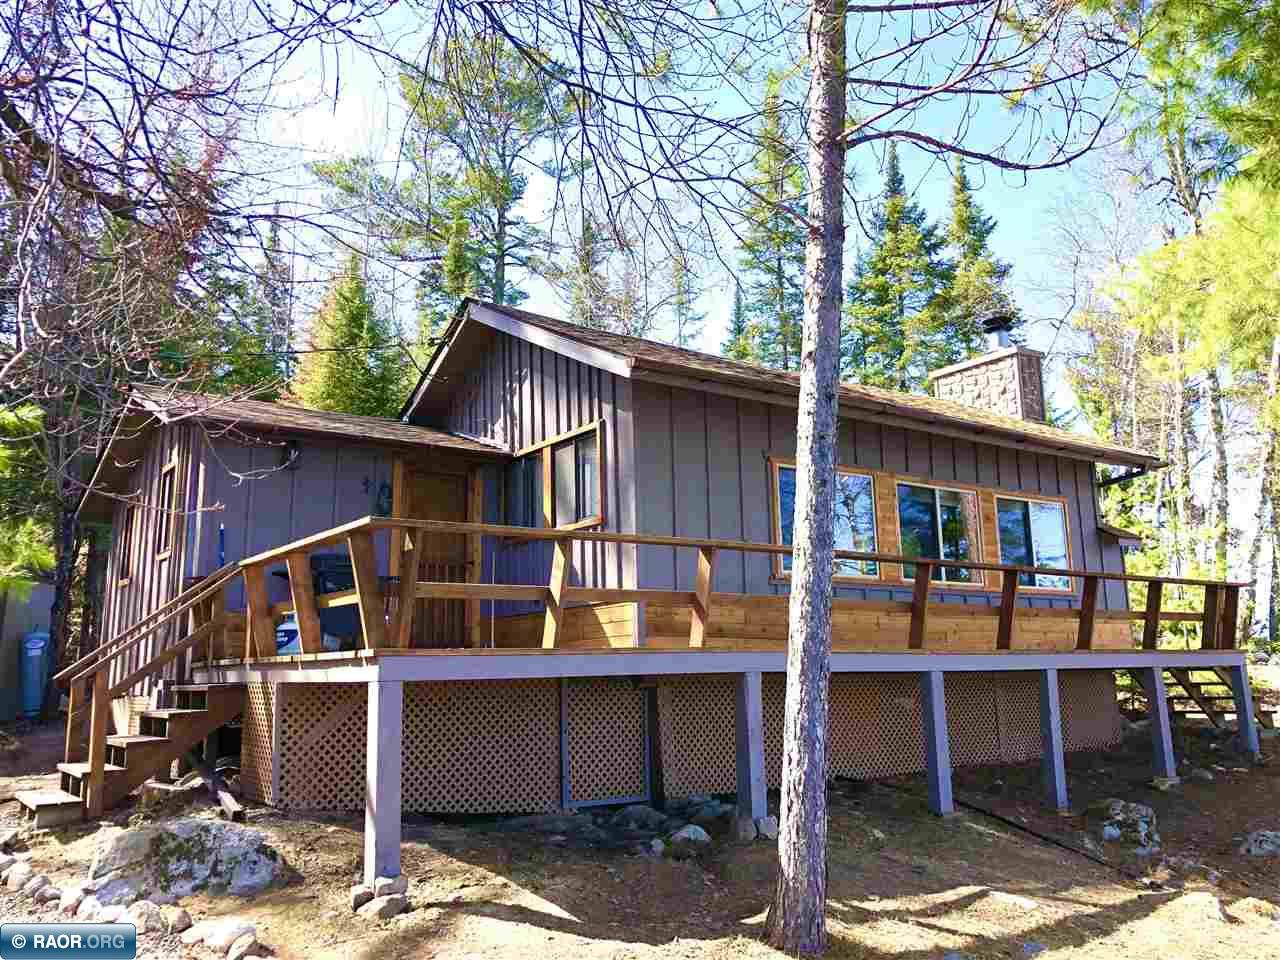 8119 Muskego Point Cook MN 55723 - Vermilion 142247 image1